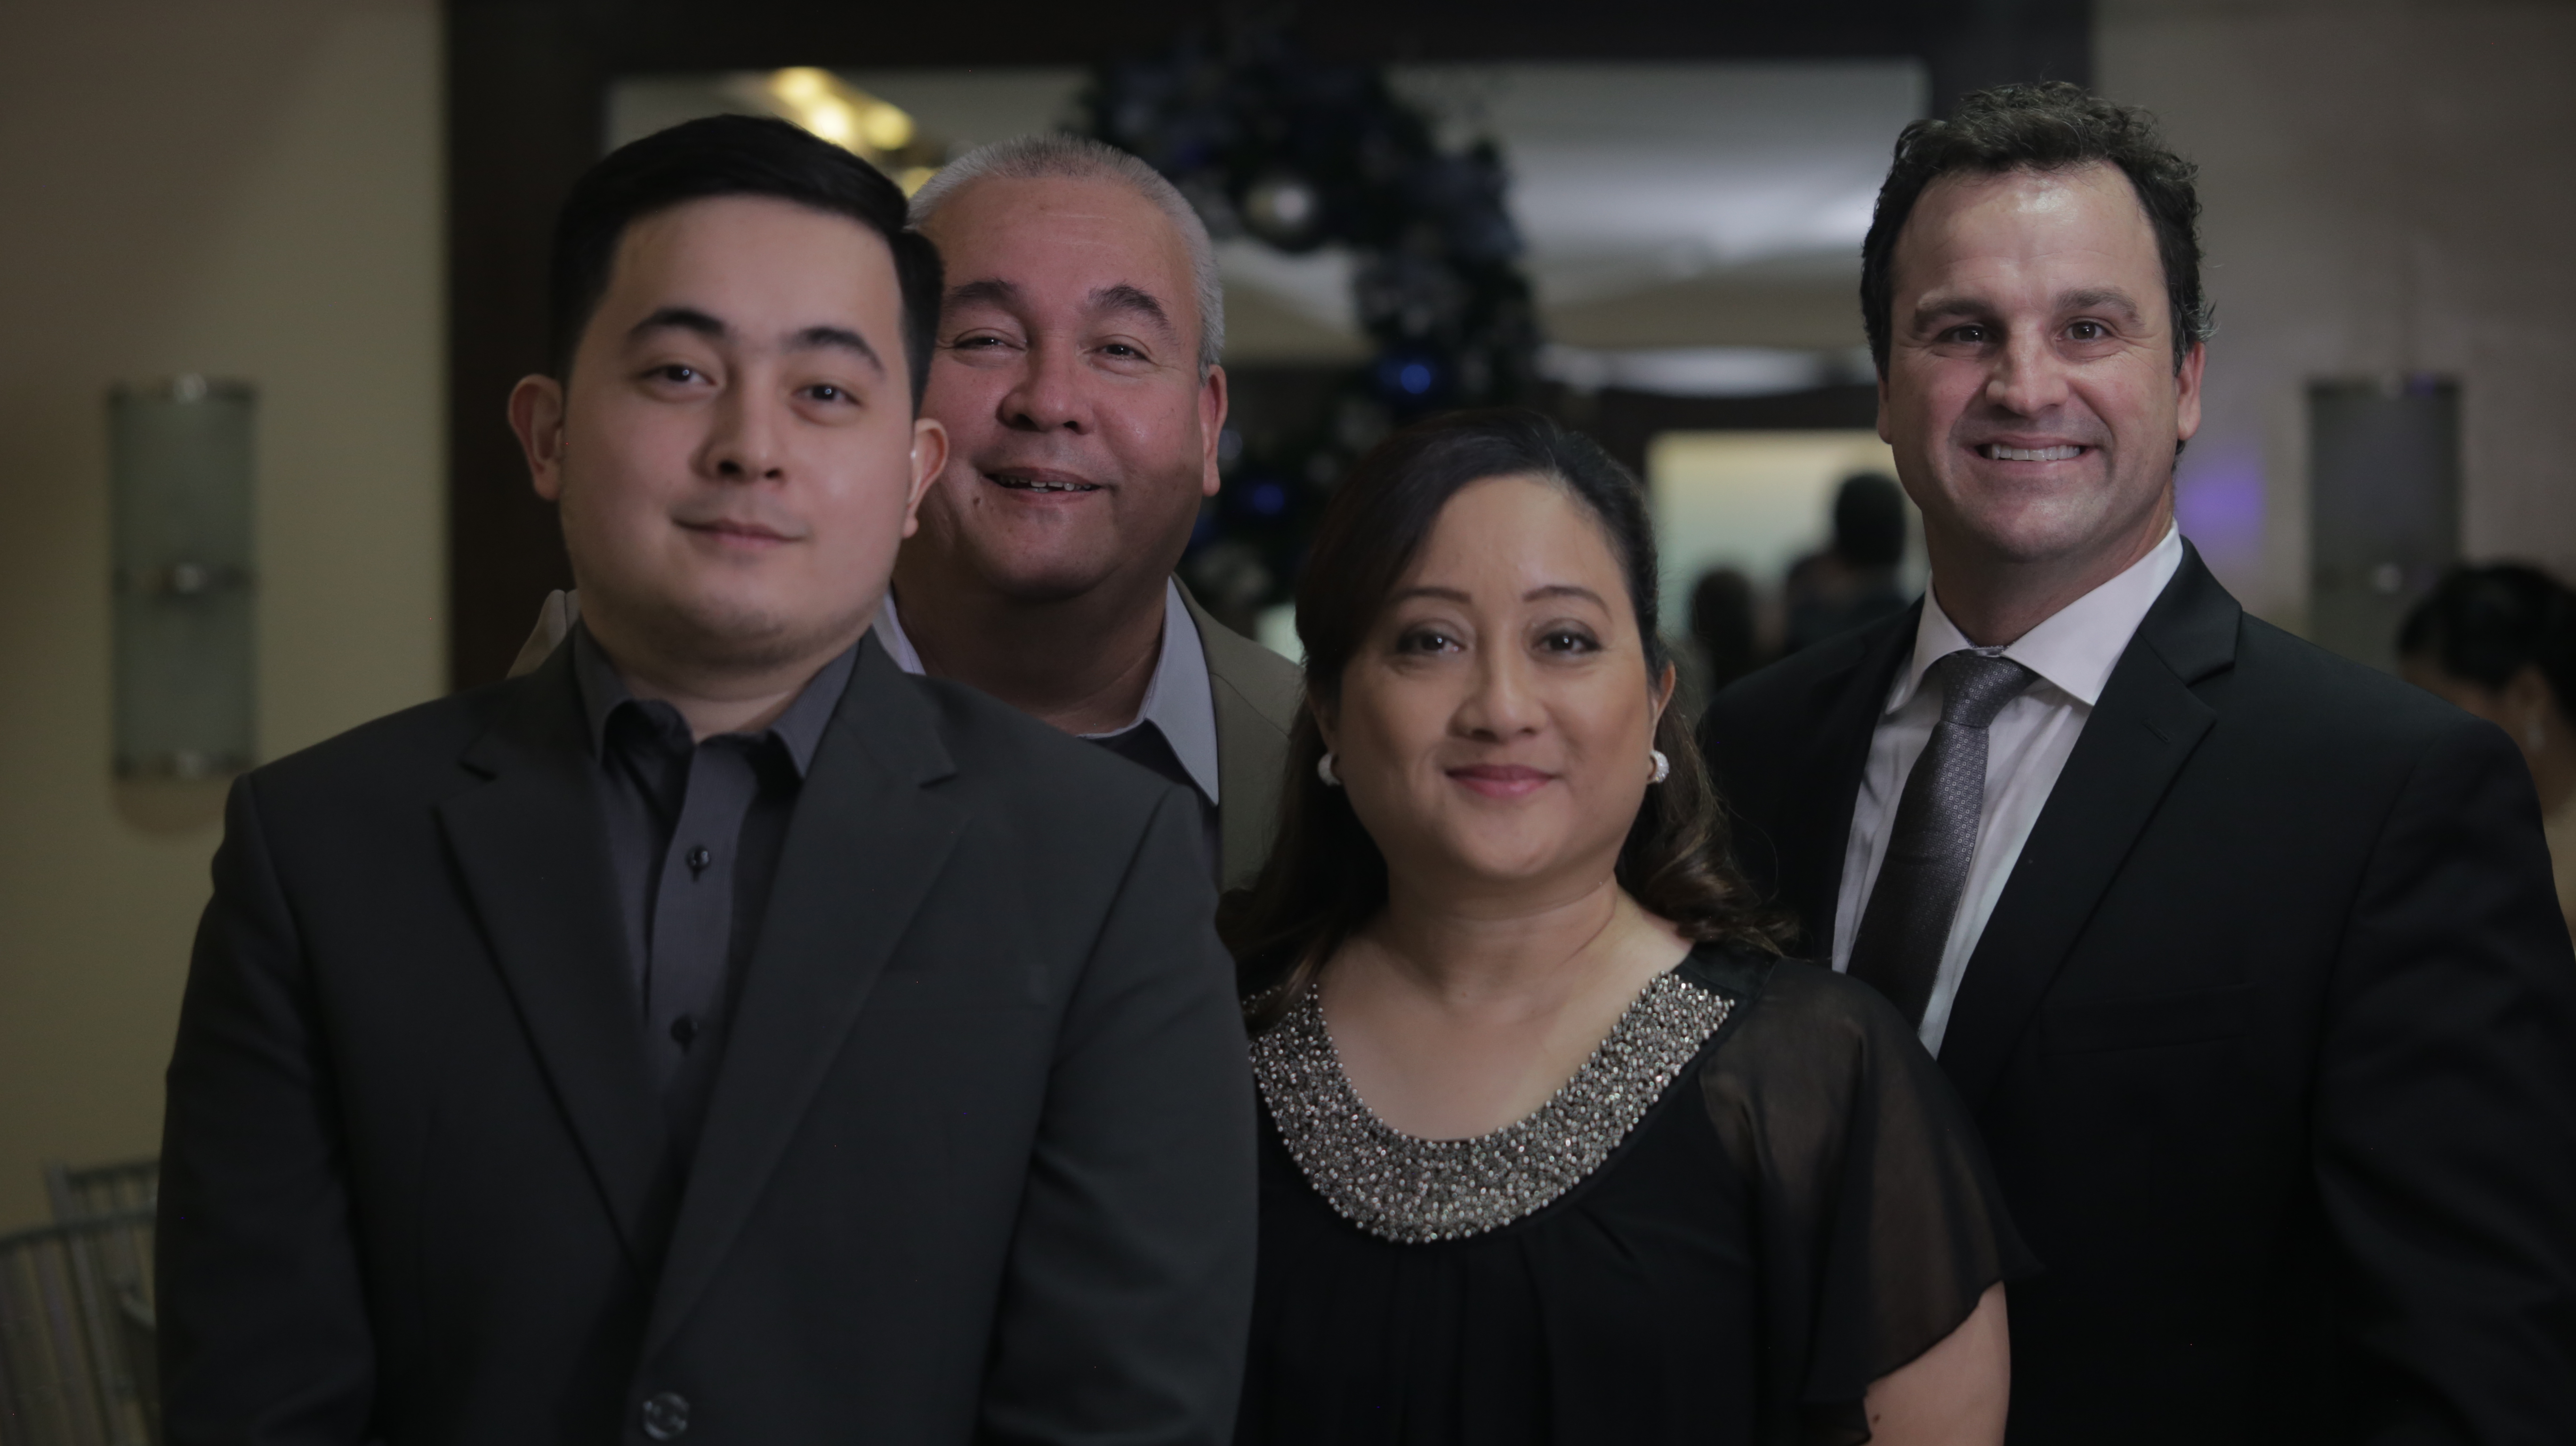 Sysgen Prom Night 2015: A Night of Glam, Music, and Fun